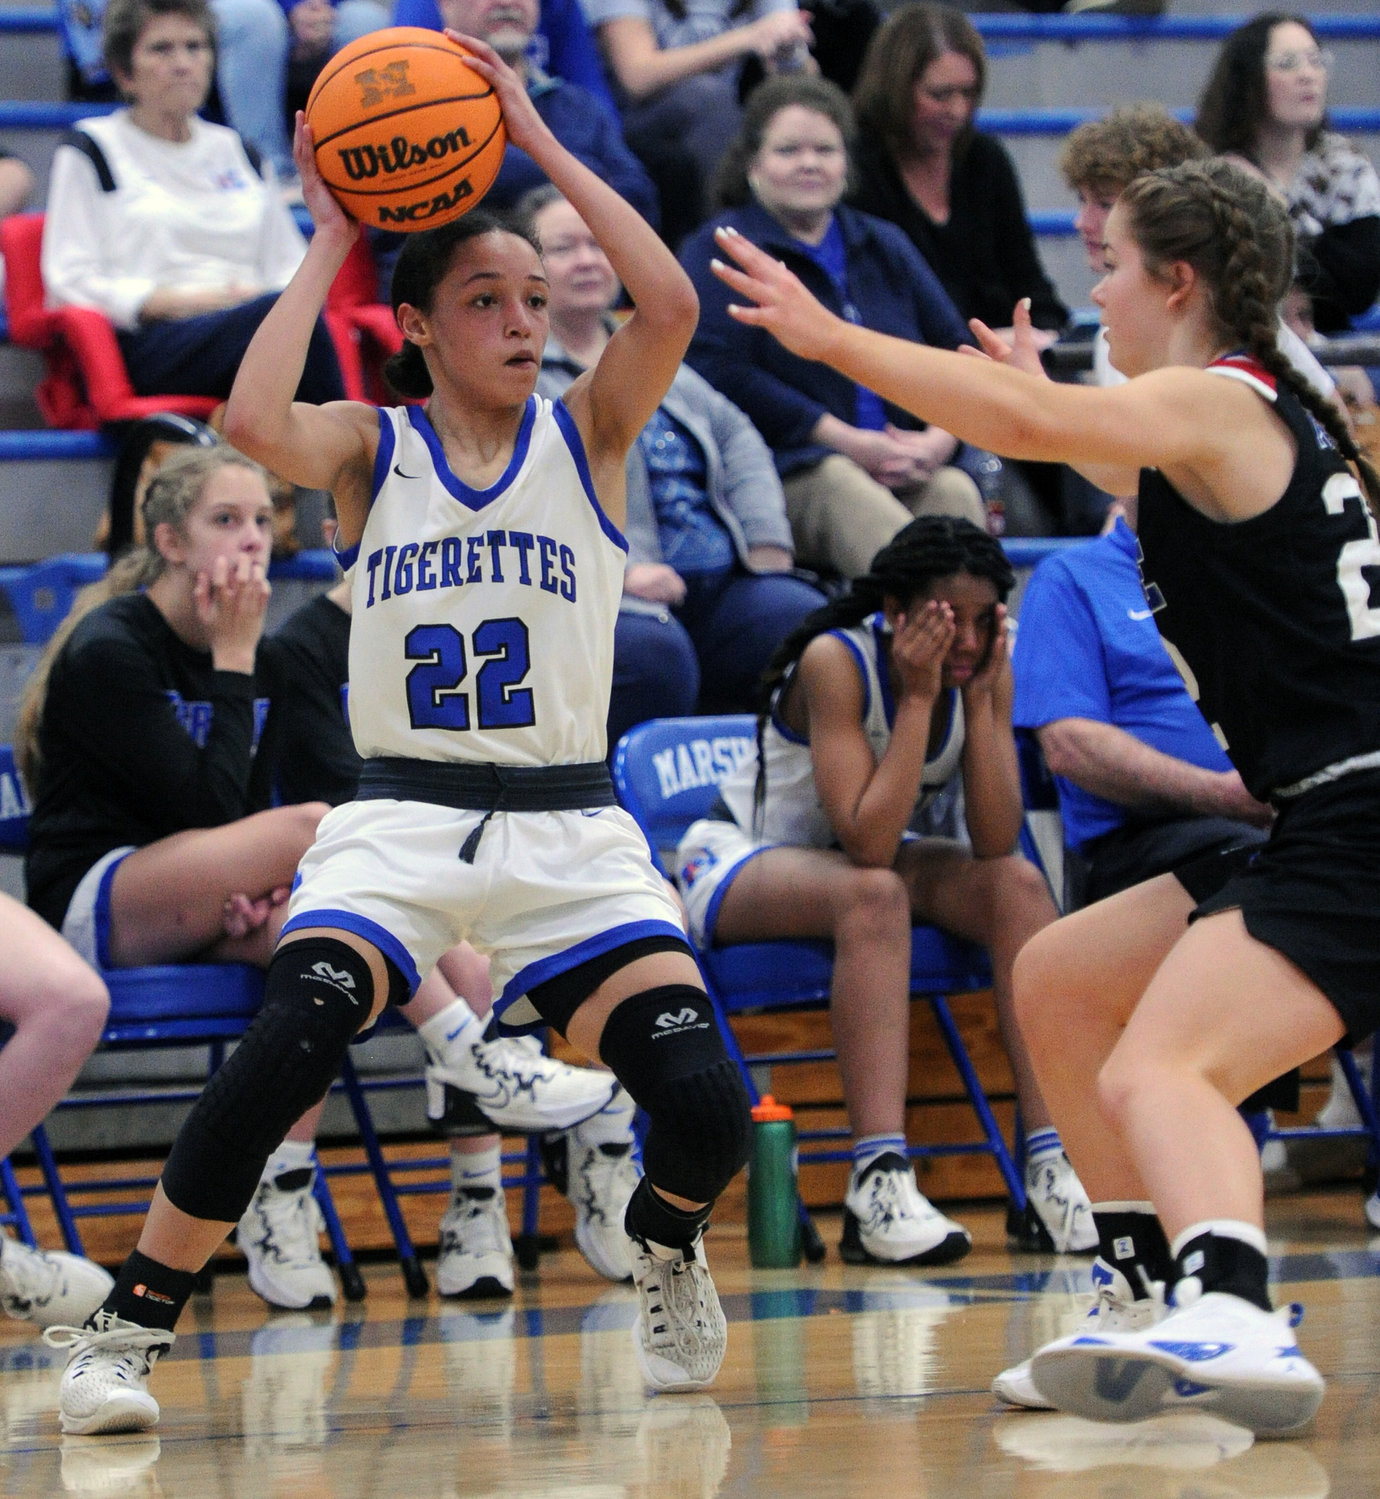 Kayla Keiler surveys the floor from the corner and looks to pass the ball. She led the Tigerettes with 14 points.